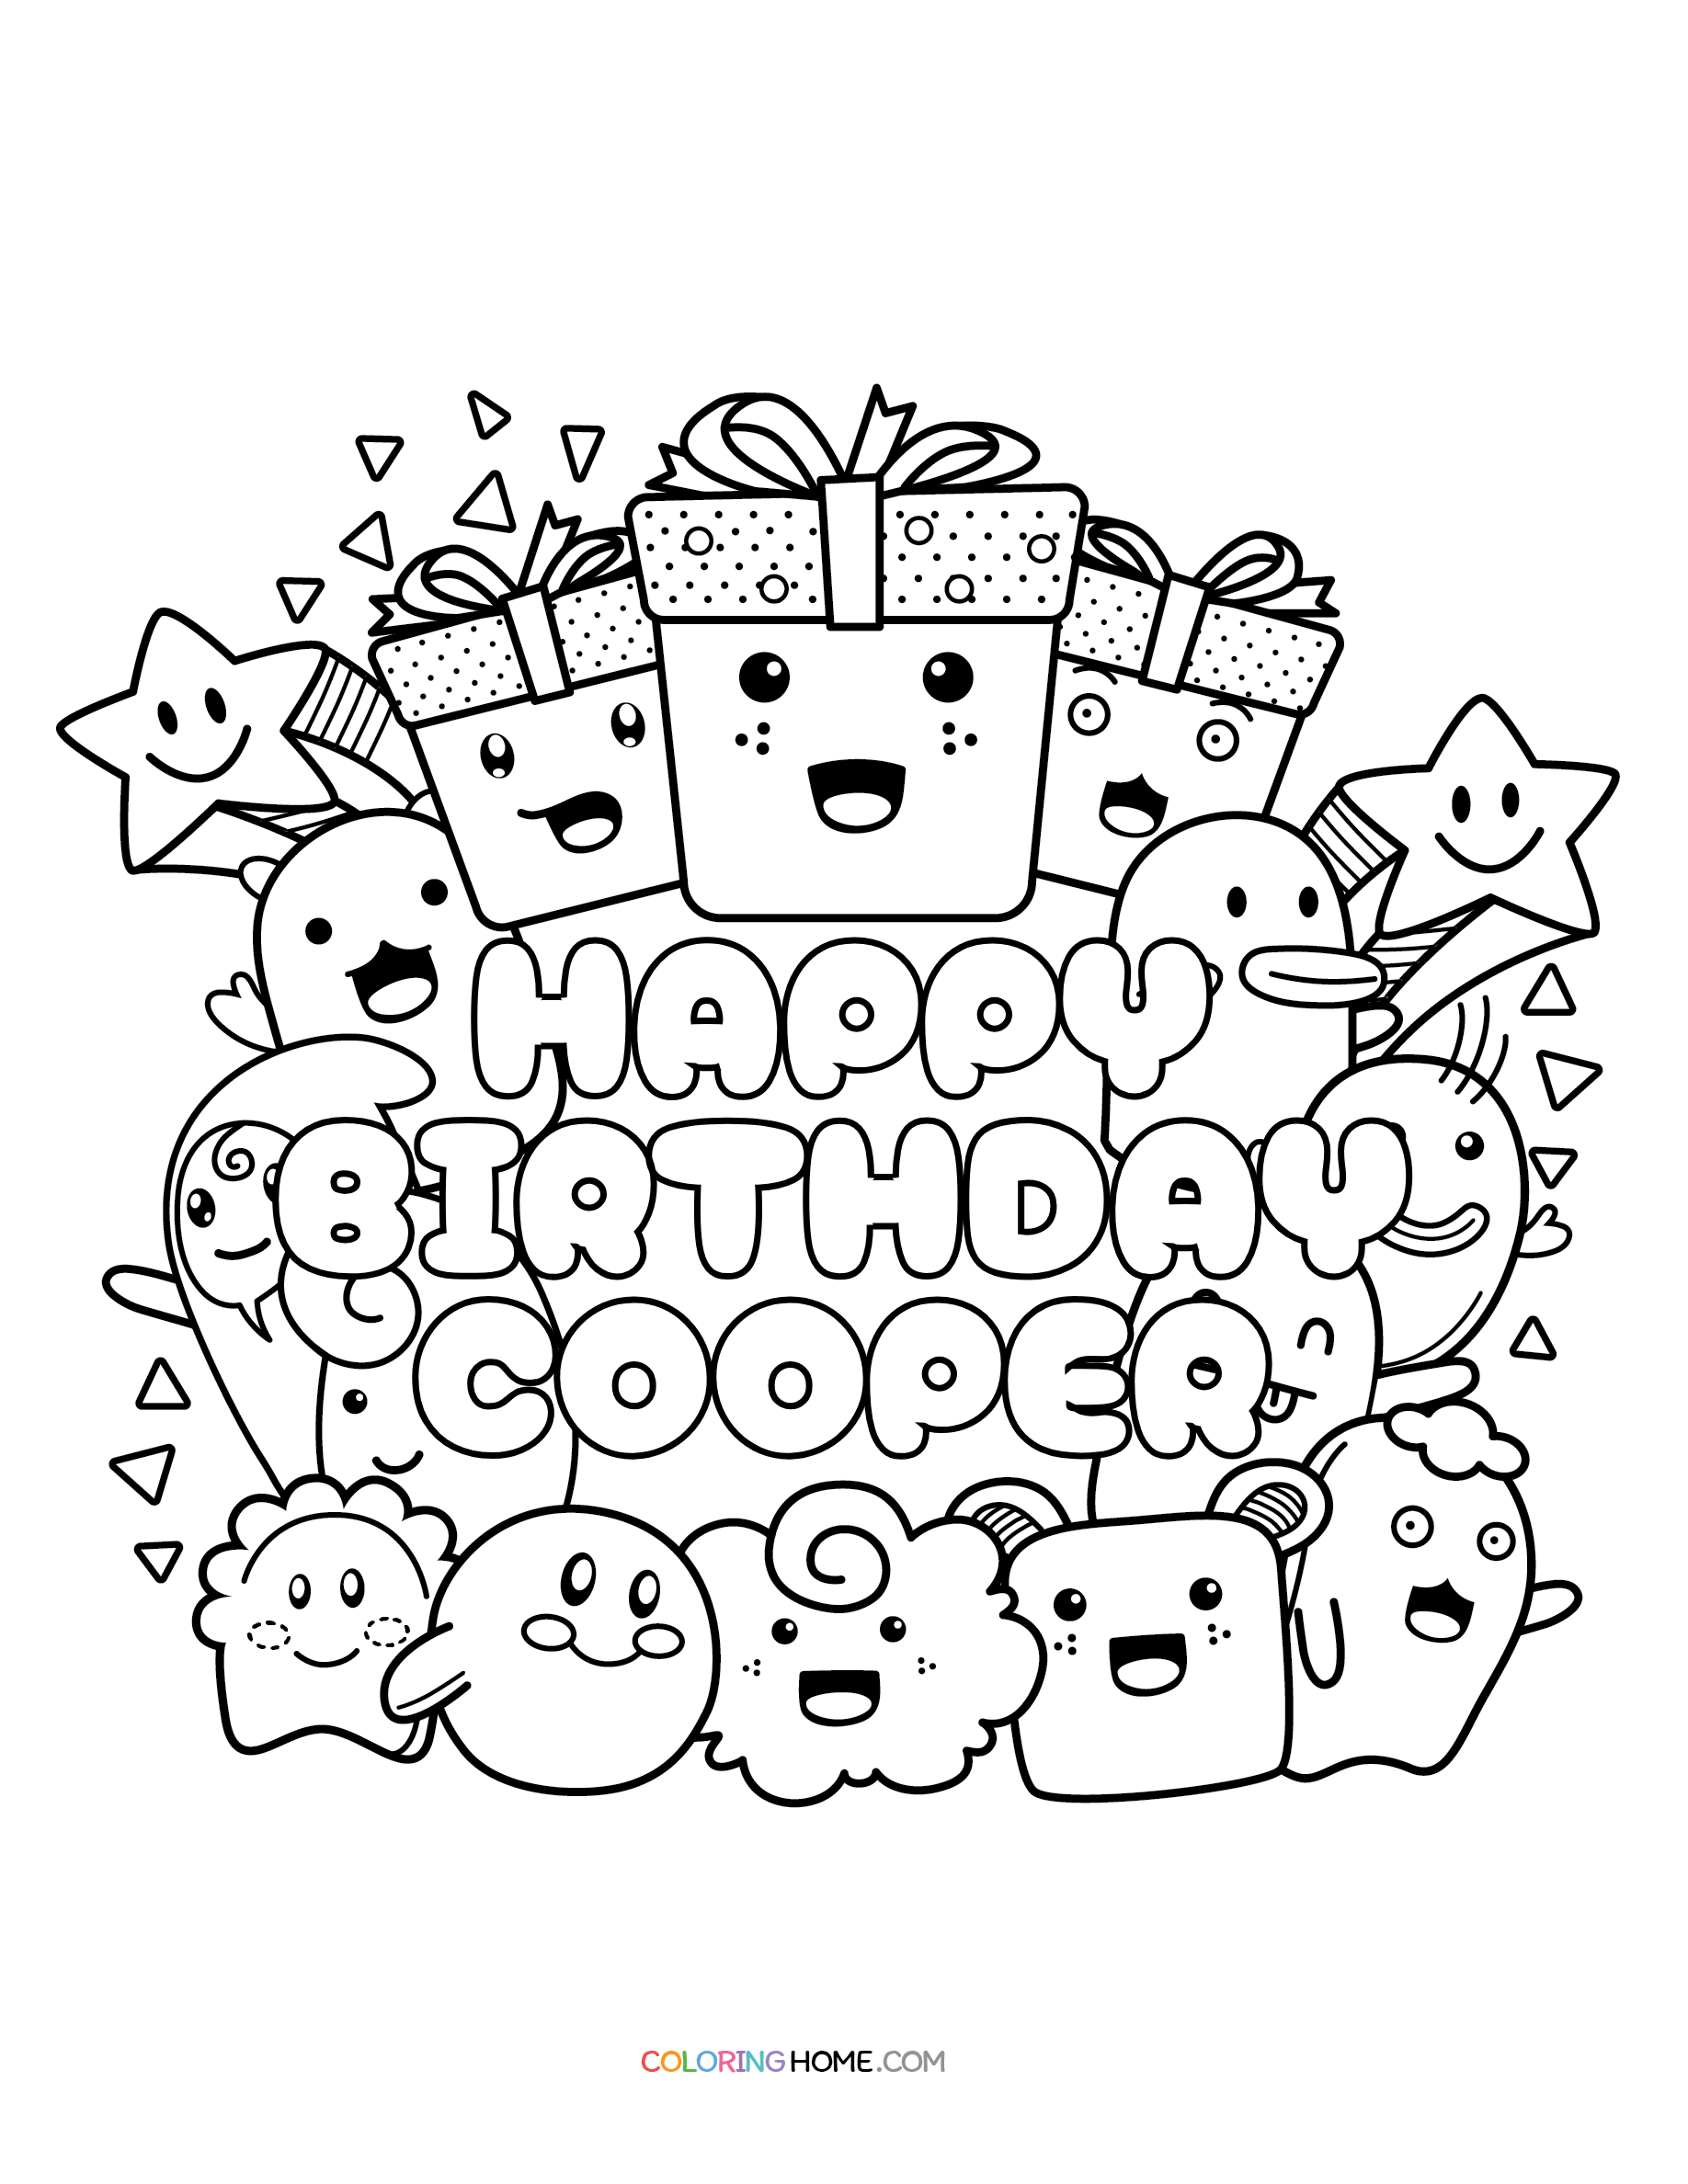 Happy Birthday Cooper coloring page